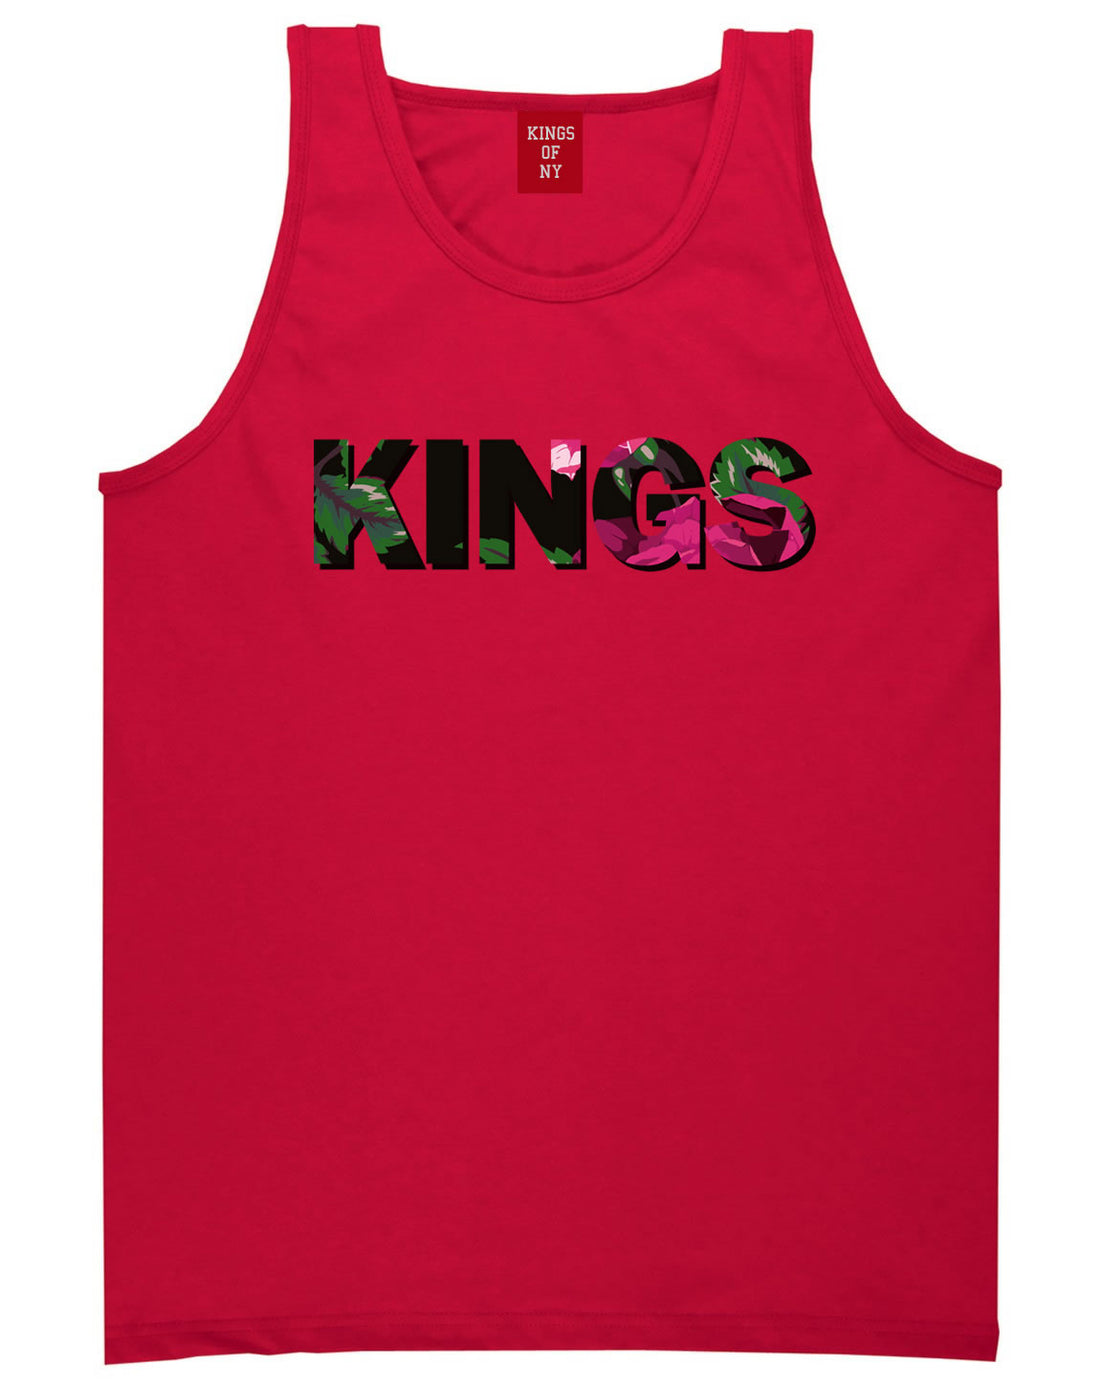 Kings Floral Print Pattern Tank Top in Red by Kings Of NY